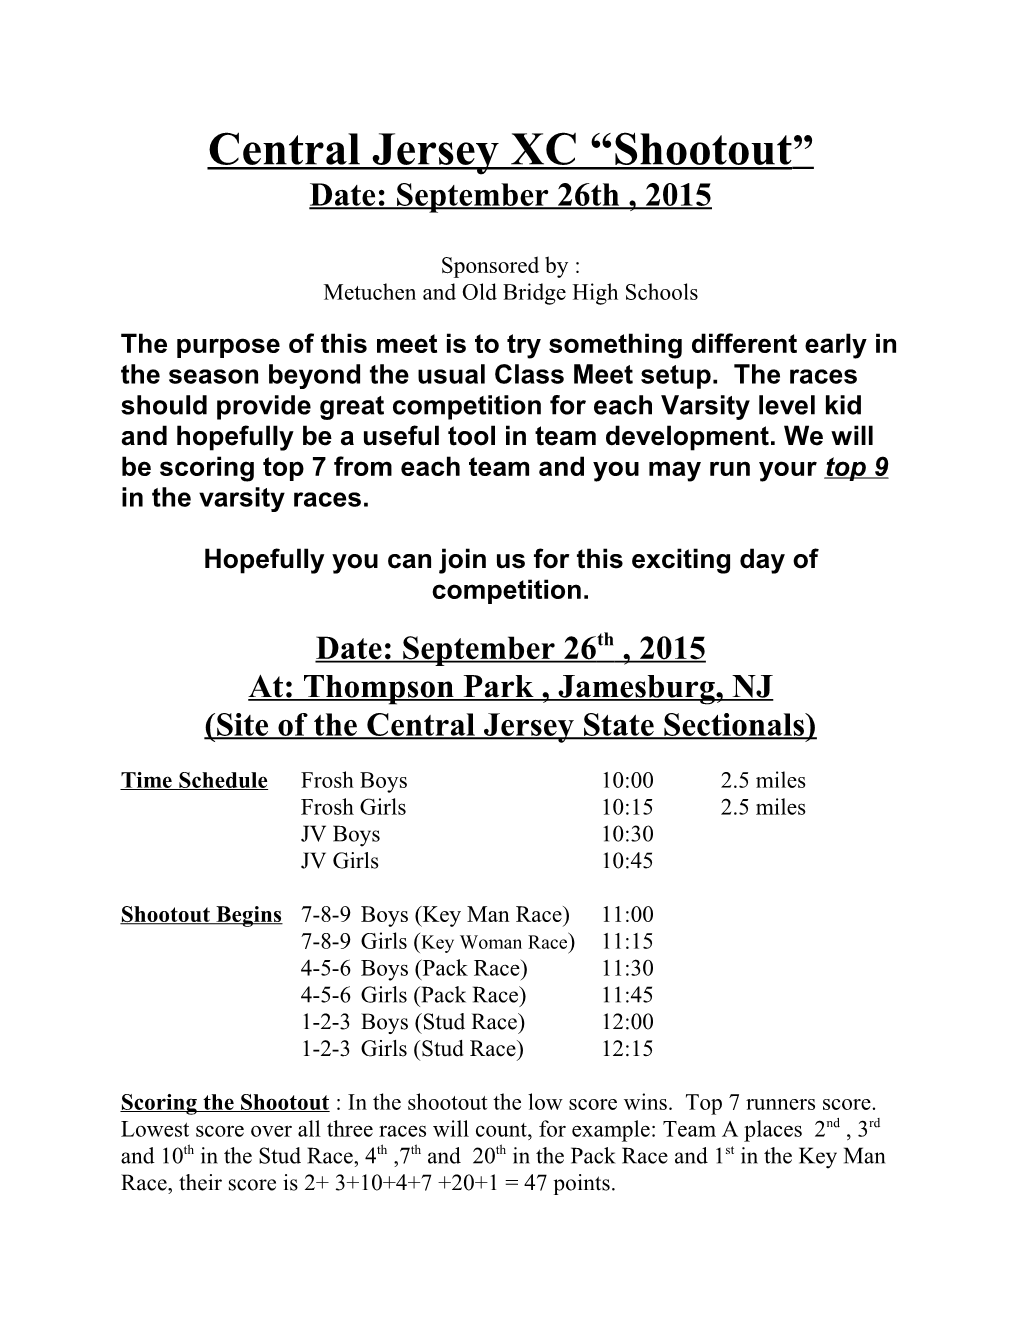 Central Jersey XC Shootout